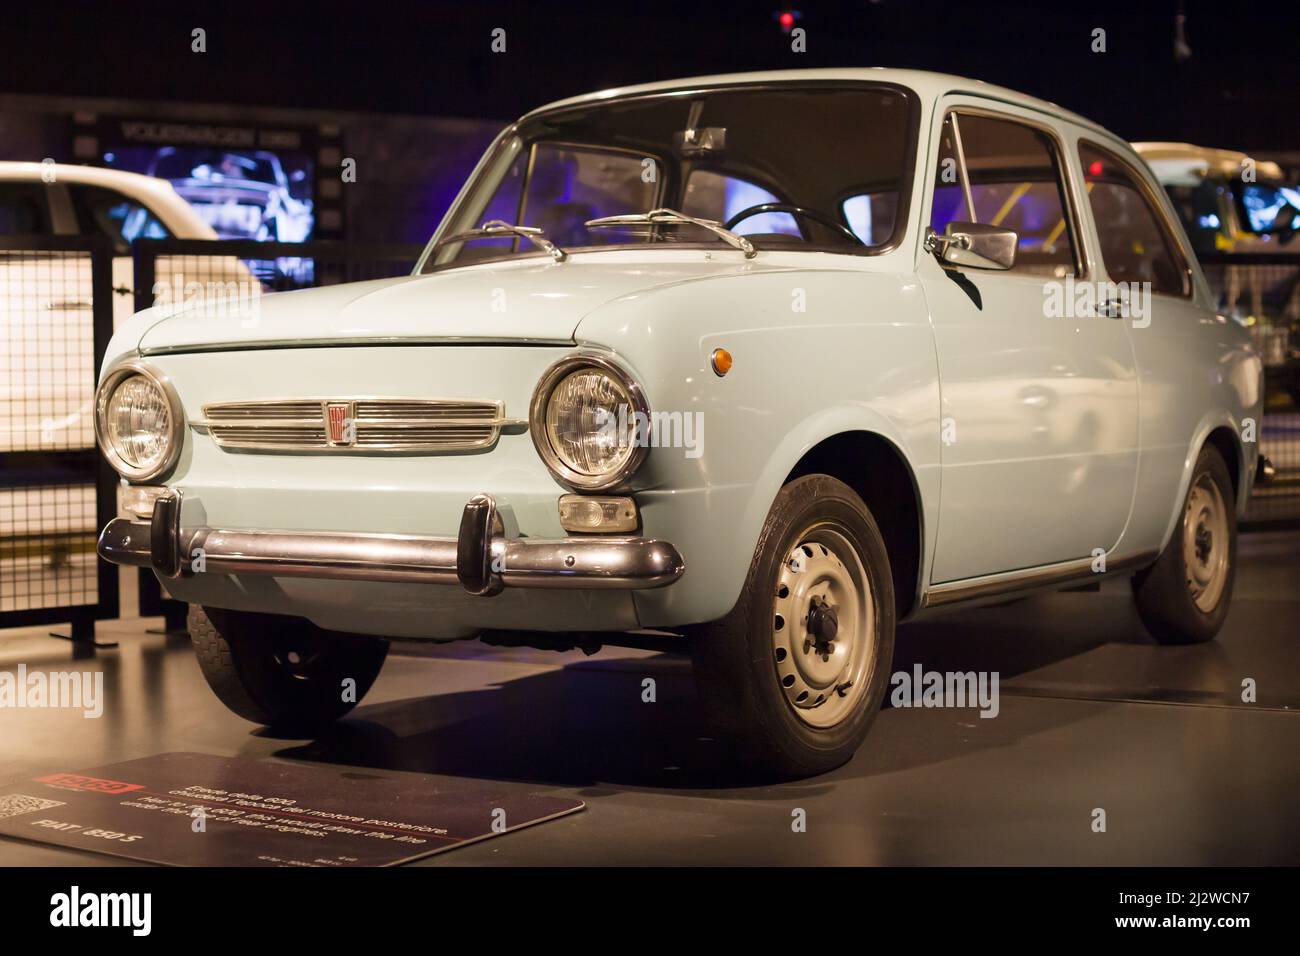 Torino, Italy - August 14, 2021: 1969 Fiat 850 S showcased at the National Automobile Museum (MAUTO) in Torino, Italy. Stock Photo